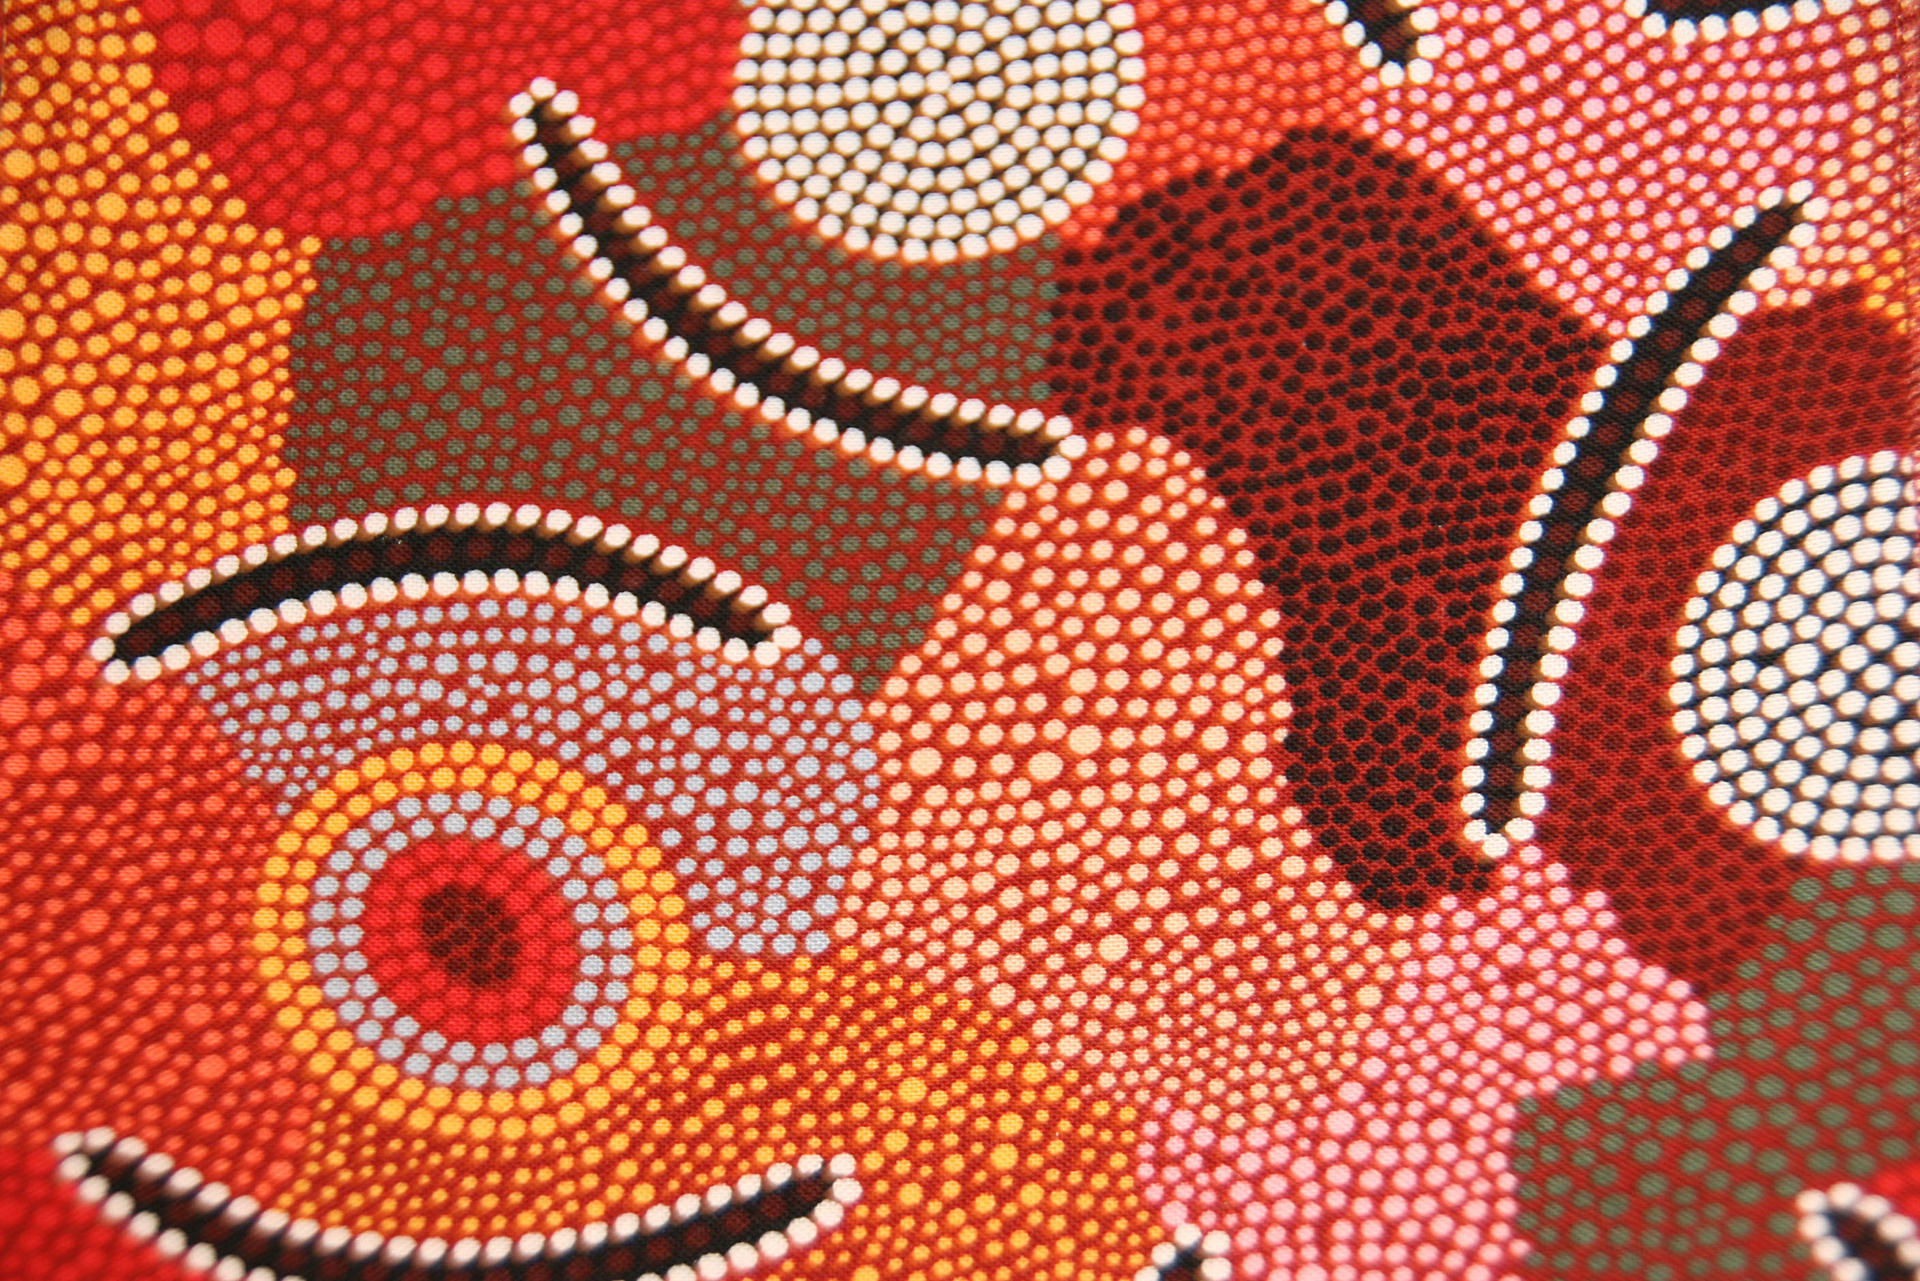 Effectiveness of a Diabetes Training Program for Aboriginal Health Workers and Practitioners